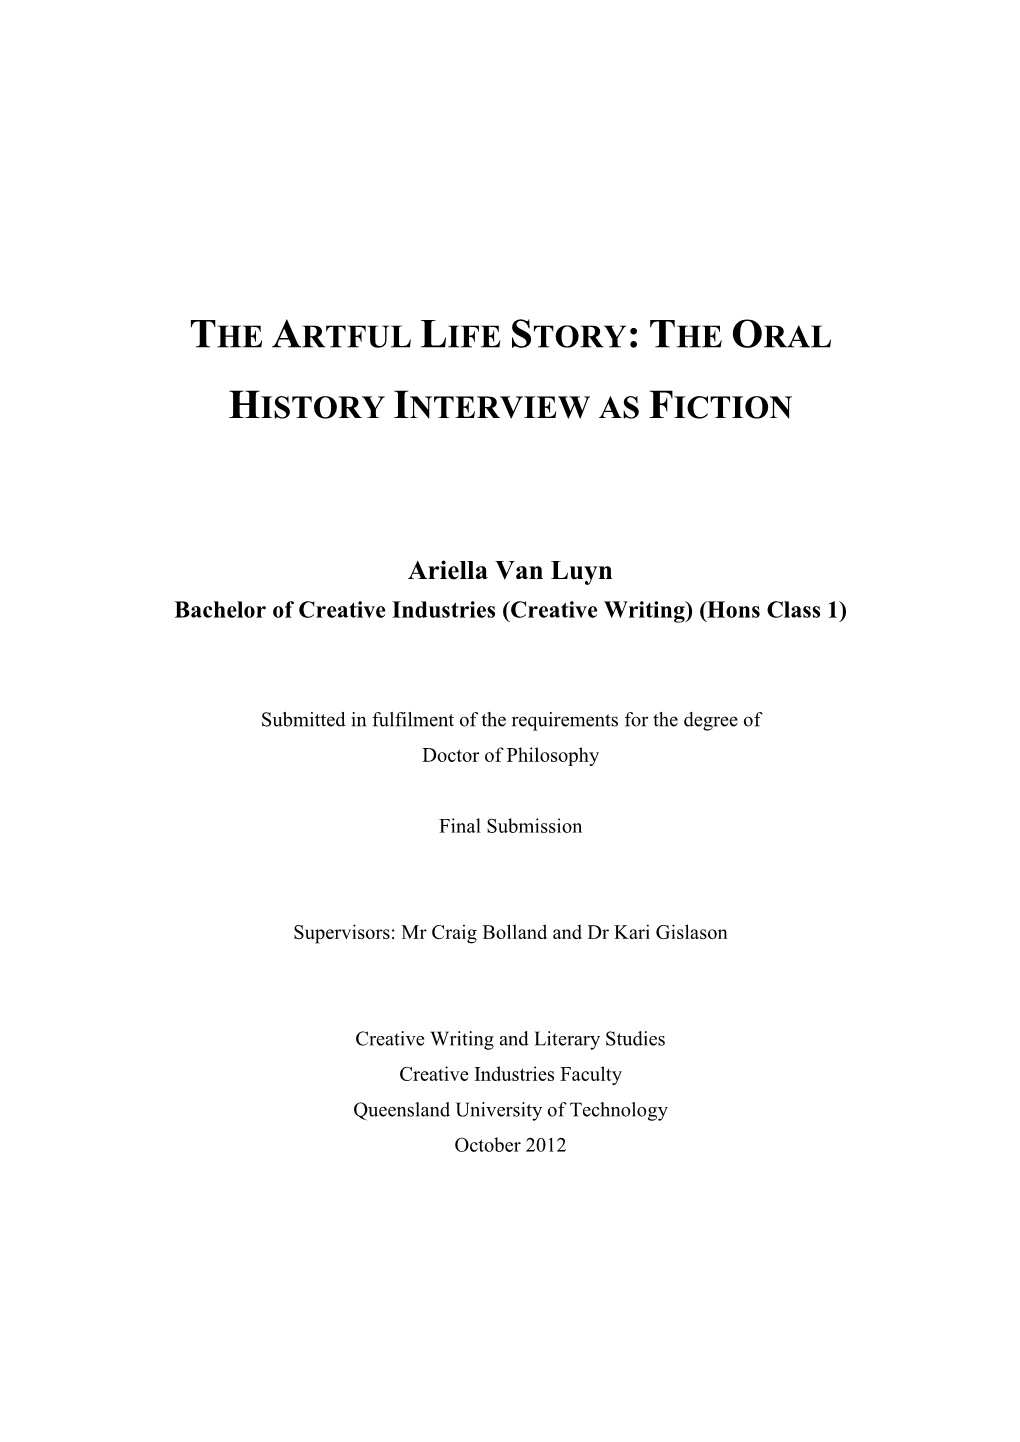 Fictionalising Oral History Interviews: Ethnographic Fiction and the Oral History Project